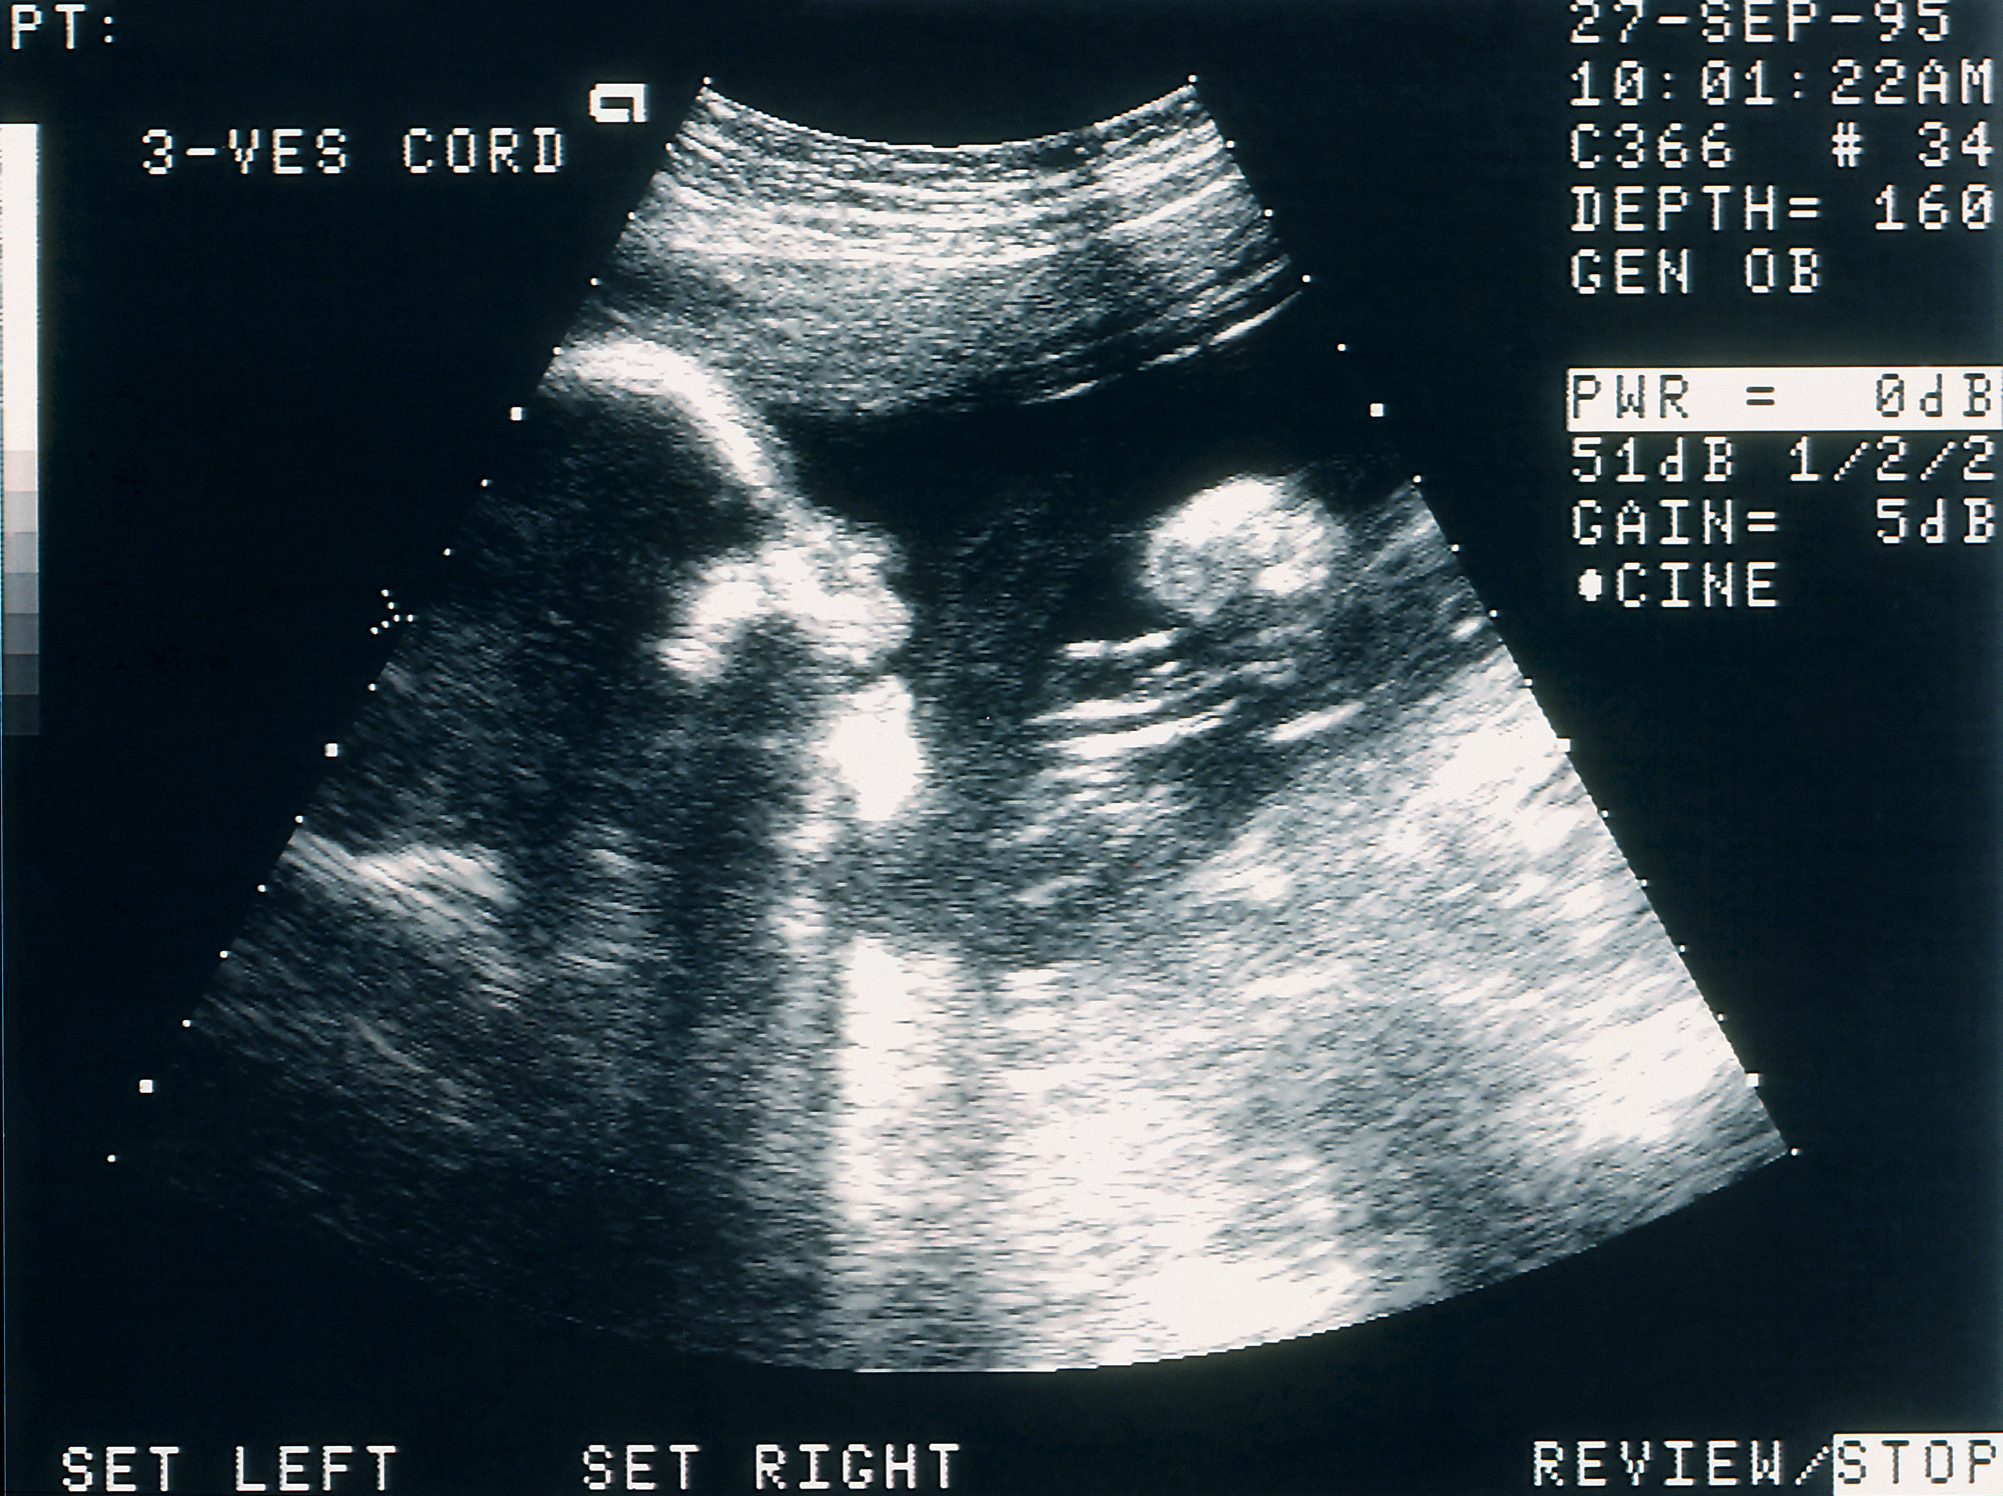 Ultrasound image showing a fetus, indicating a pregnancy announcement related to a wedding-themed article